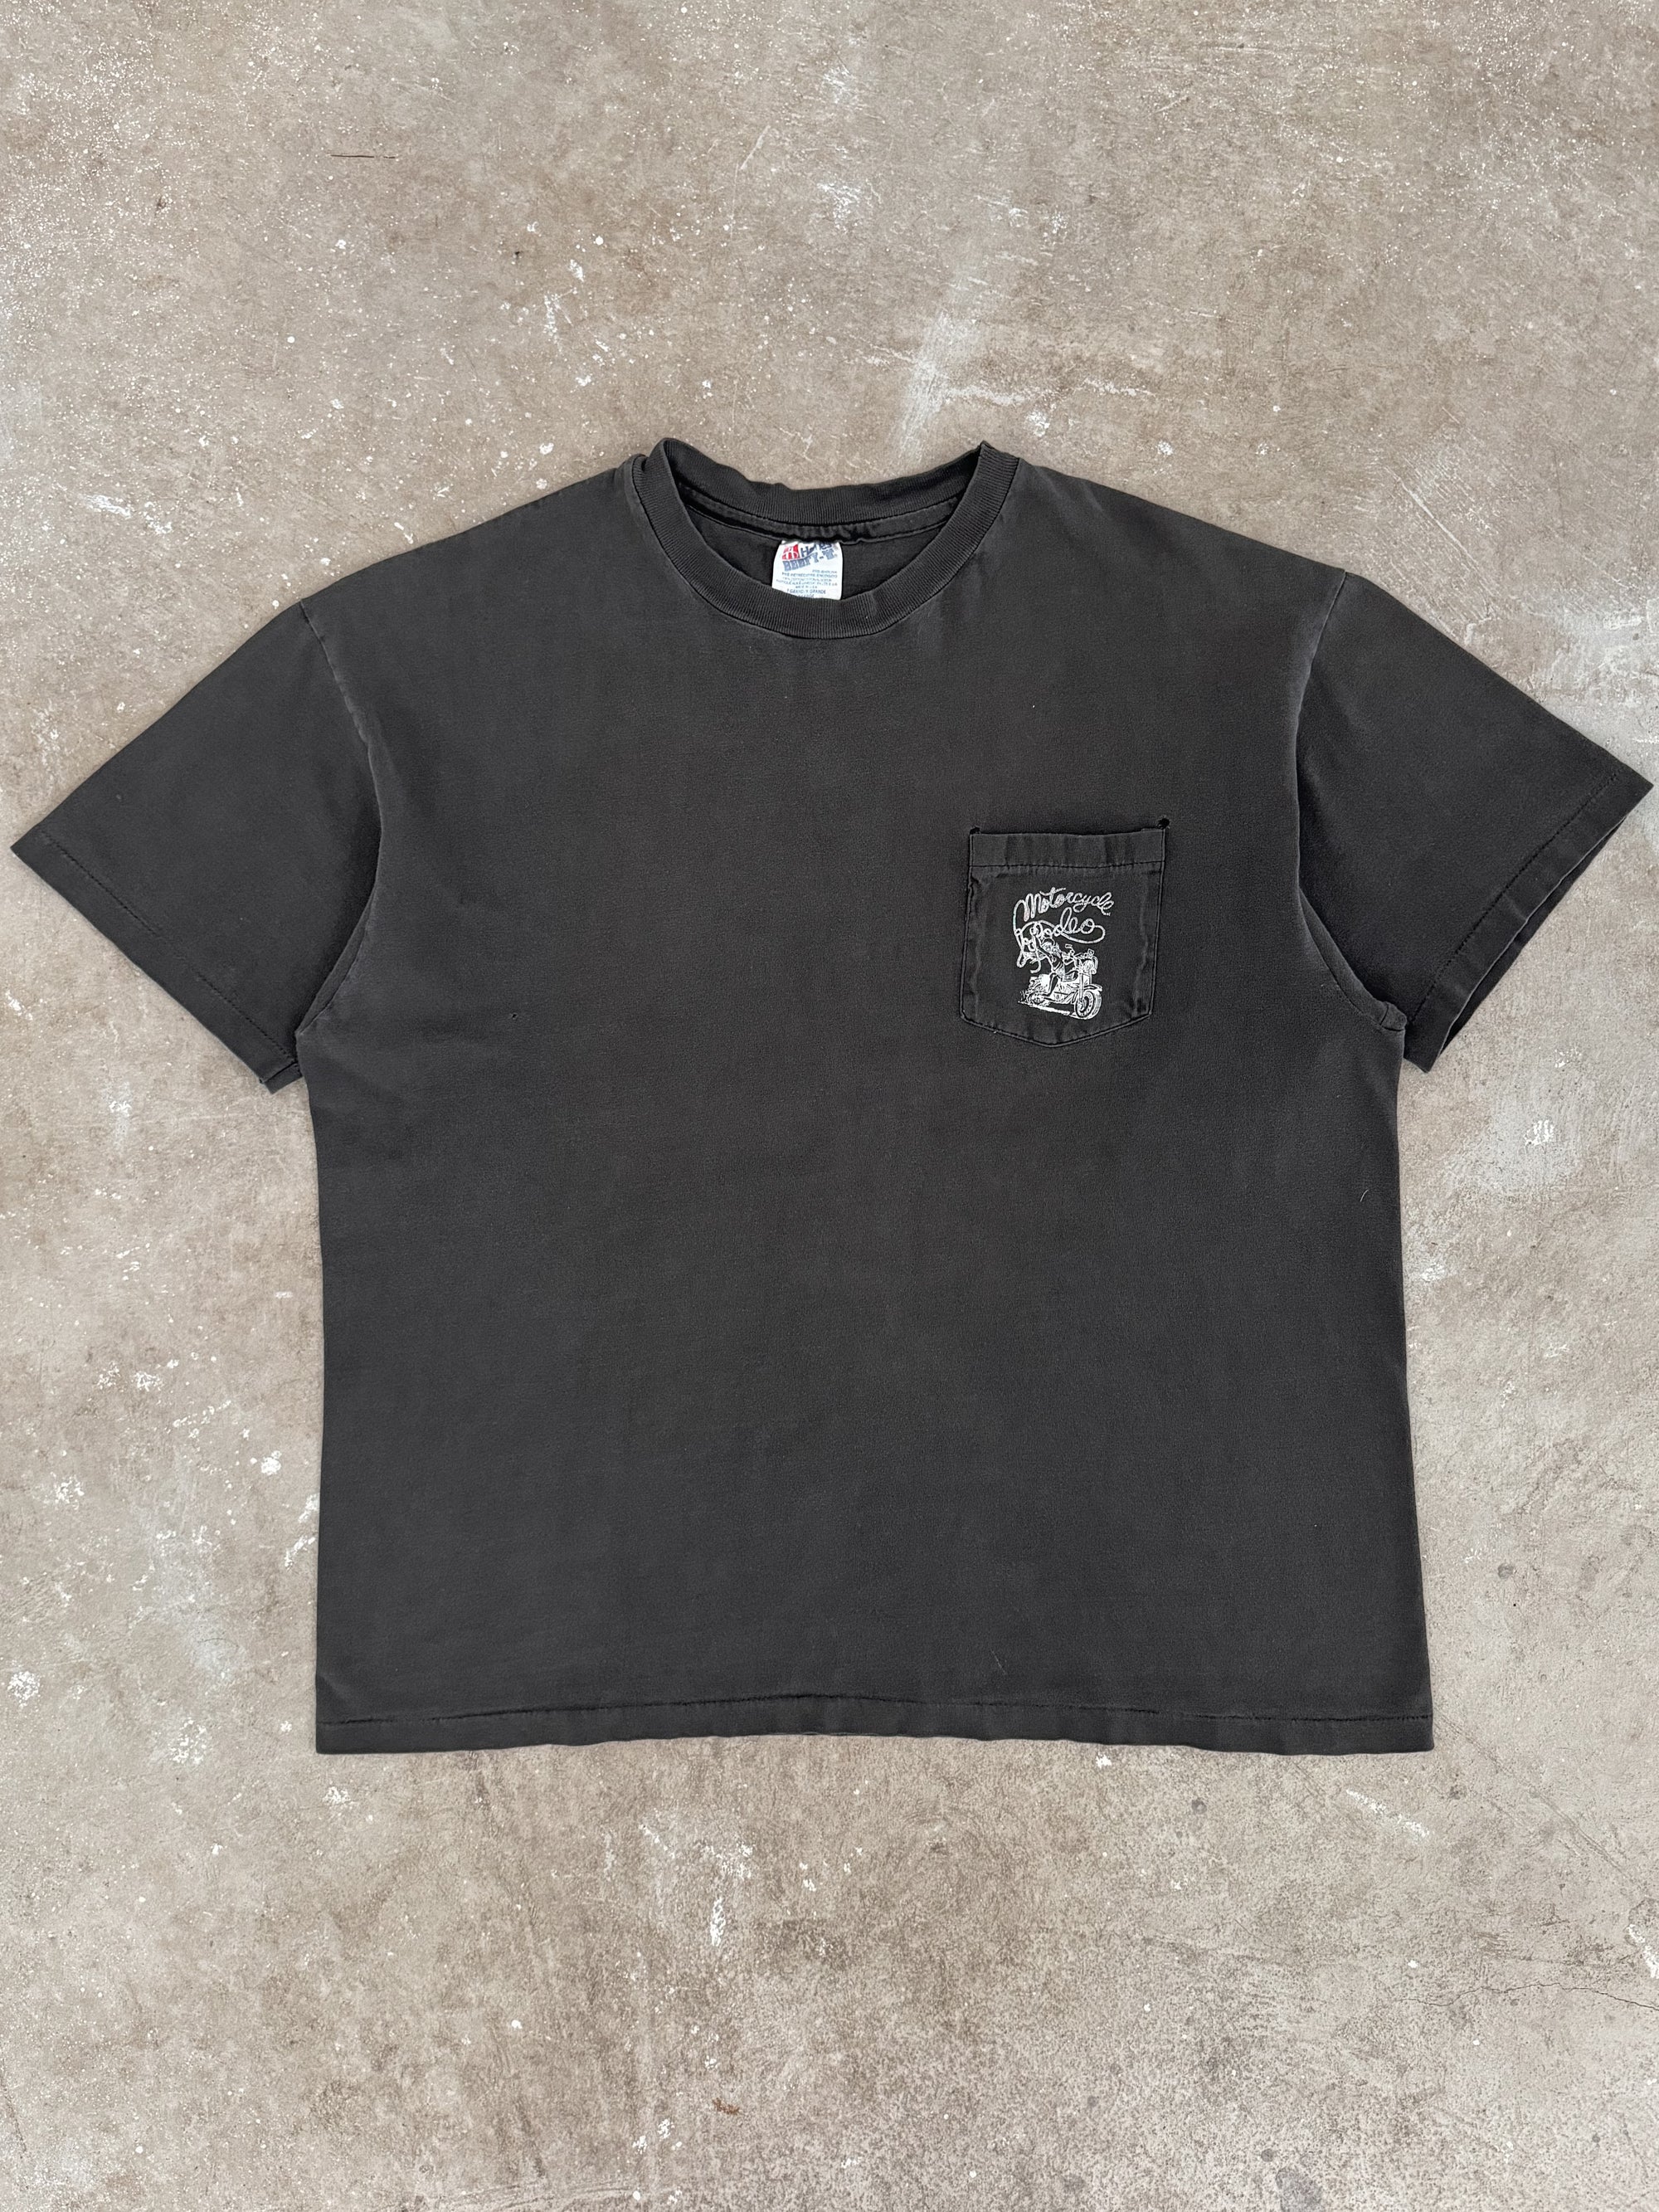 1990s "Motorcycle Rodeo" Tee (XL)